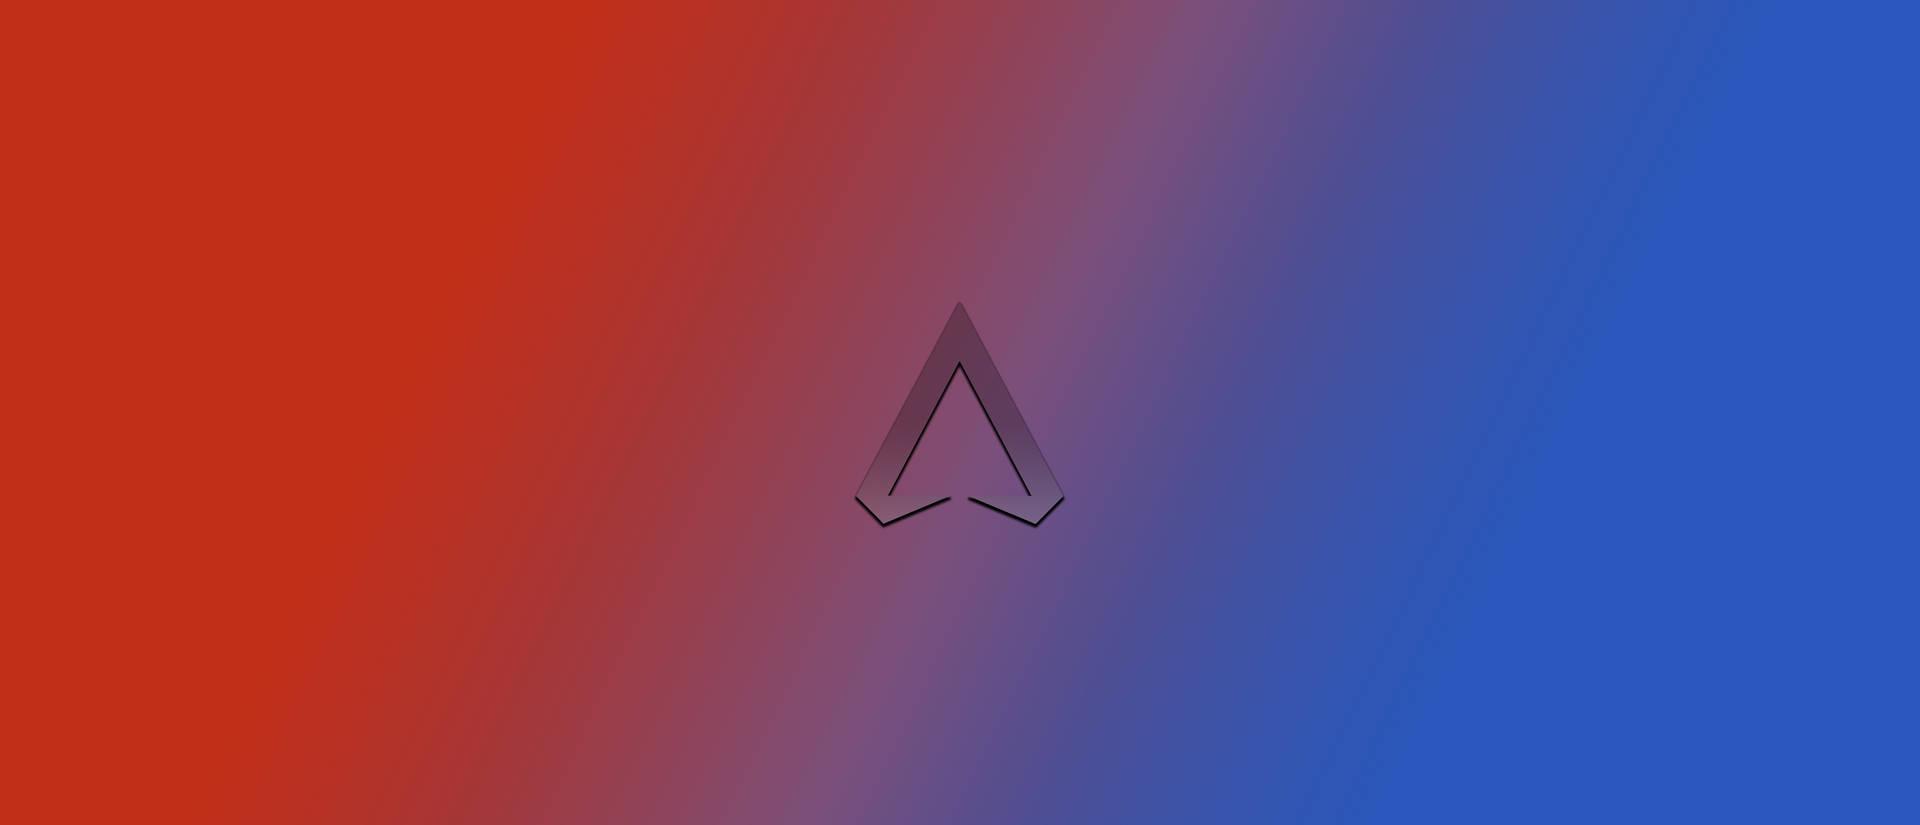 Iconic Apex Legends Logo for iPhone Wallpaper